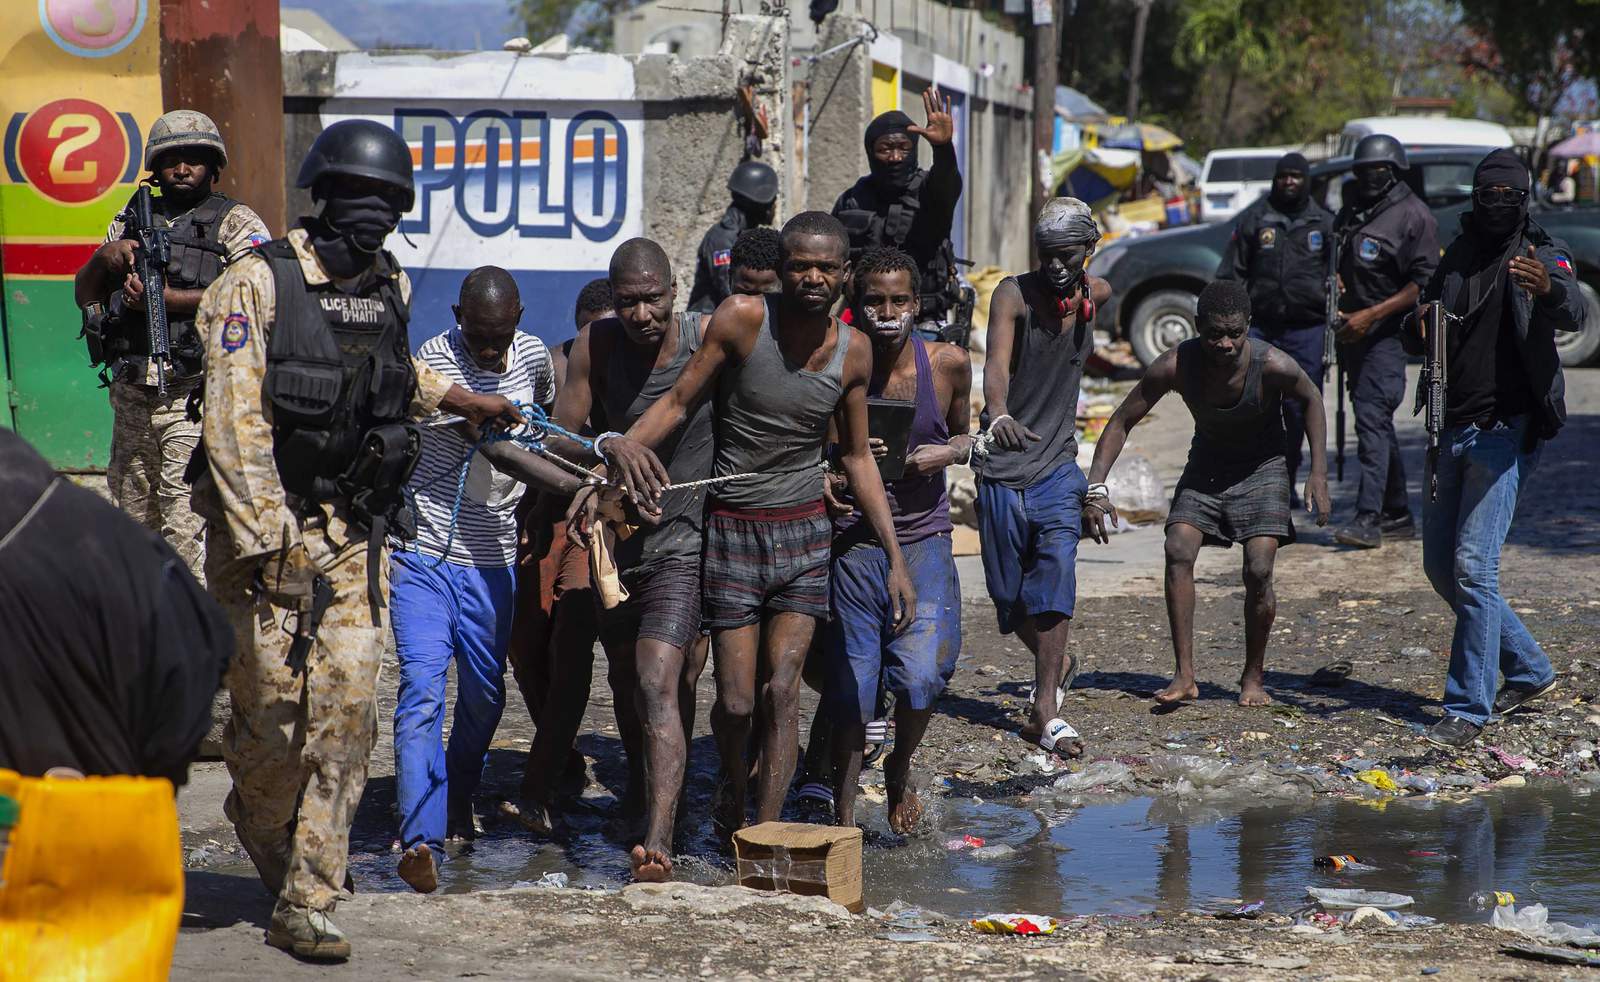 8 dead, 1 injured after prison outbreak in Haiti's capital